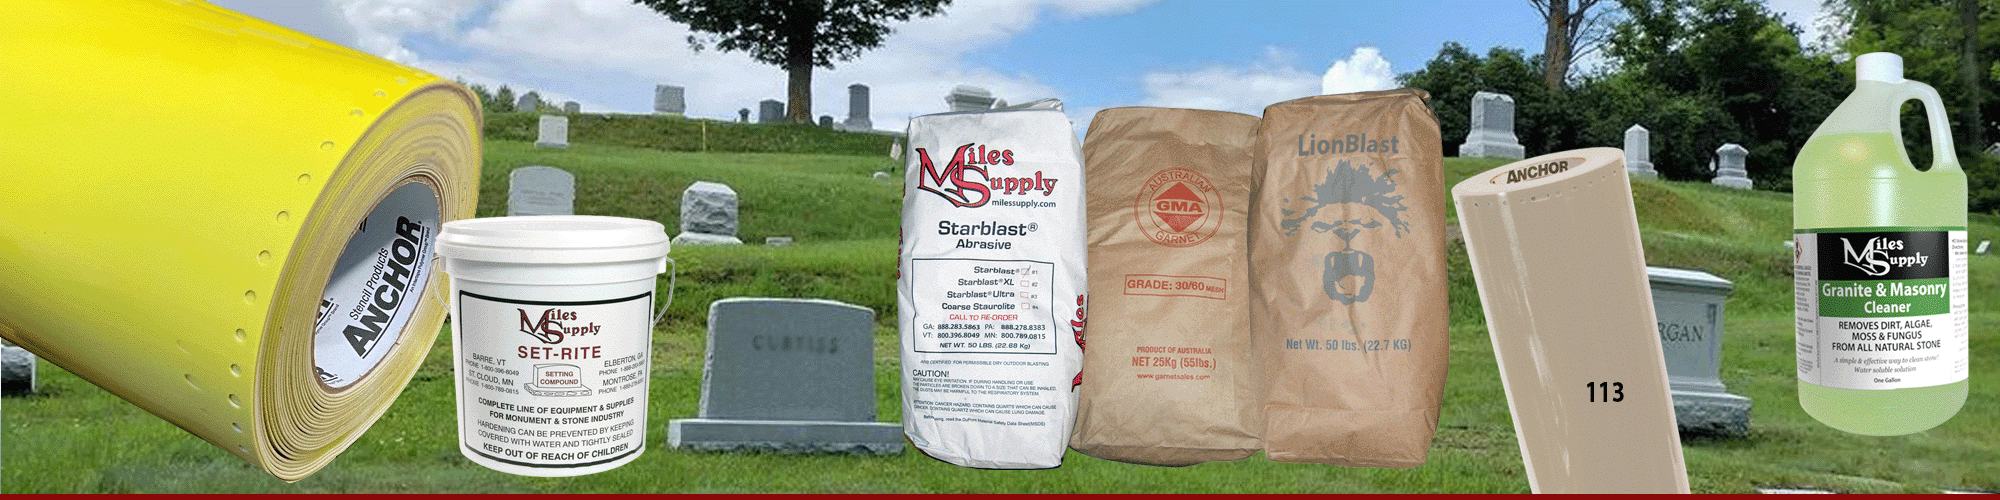 Need Anything? We have your consumables for cemetery work